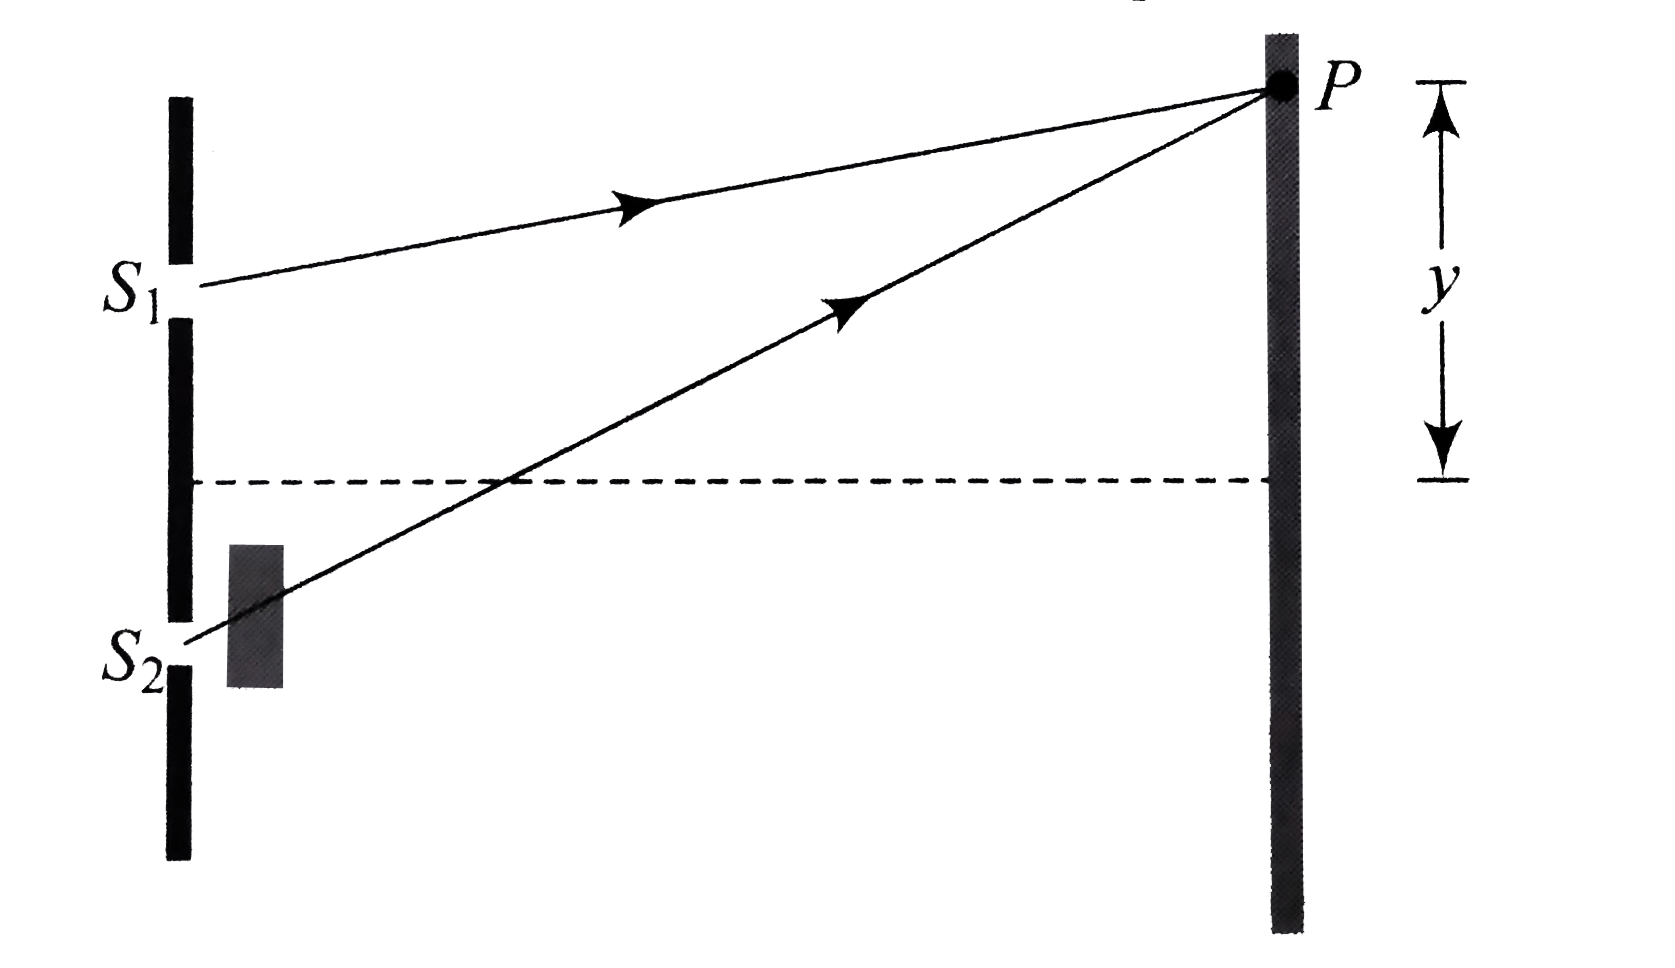 Young's double-slit experiment setup with ligth of wavelength lambda = 6000 Å, distance between two slit in 2 mm and distance between the plane of slits and the screen. Is 2 m. The slits are of equal intensity. When a sheet of glass of refractive index 1.5 (which permtis only a fraction eta of the incident light to pass through) and thickness 8000 Å is placed in front of the lower slit, it is observed that the intensity at a point P, 0.15 mm above the central maxima, does not change.      Intensity at point P is